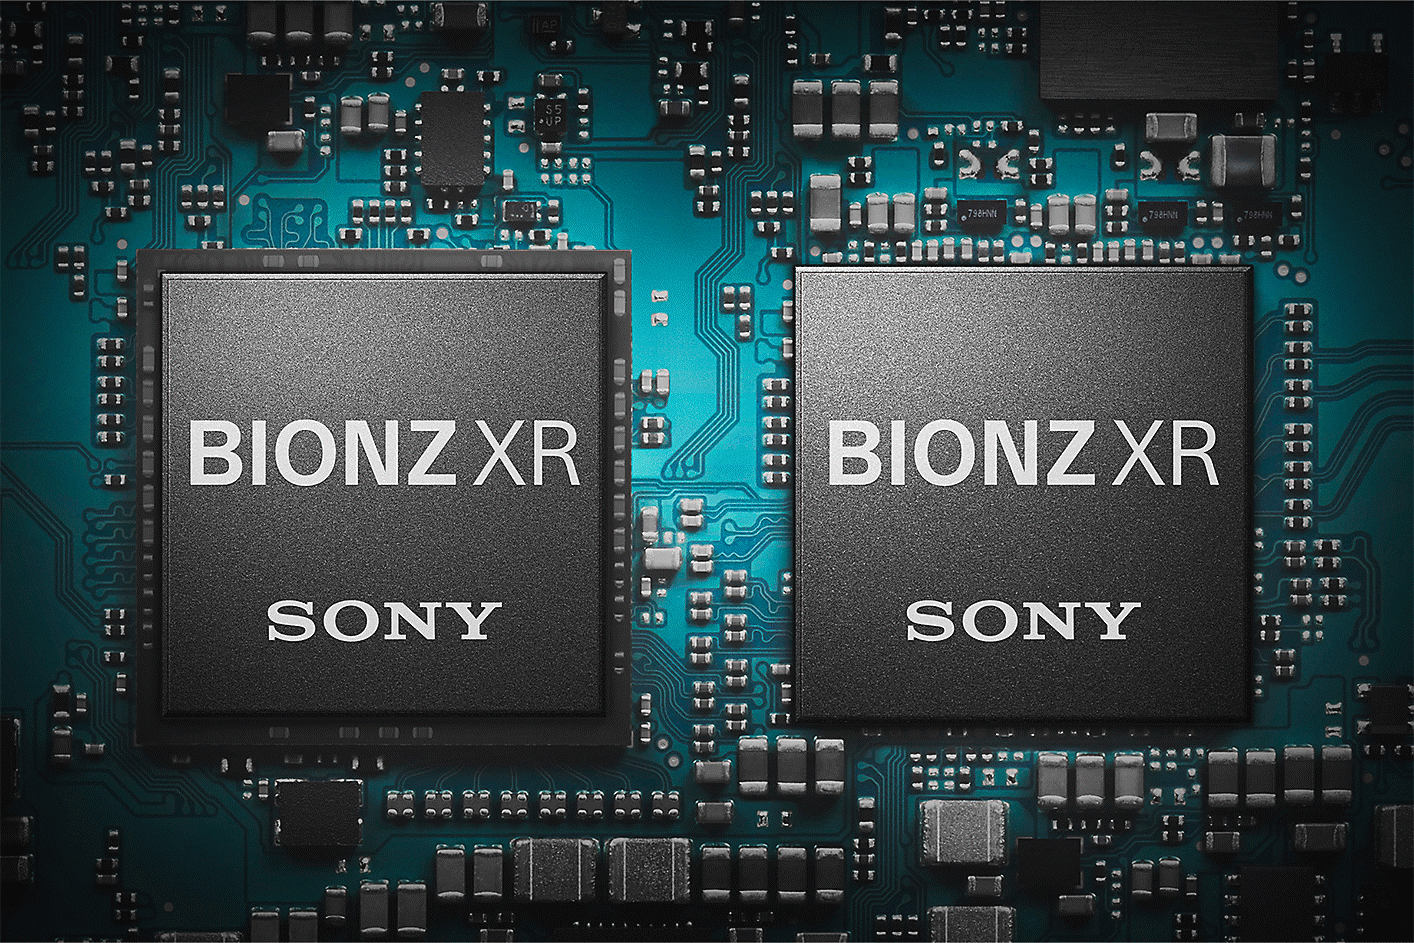 Photo of the BIONZ XR image-processing engine